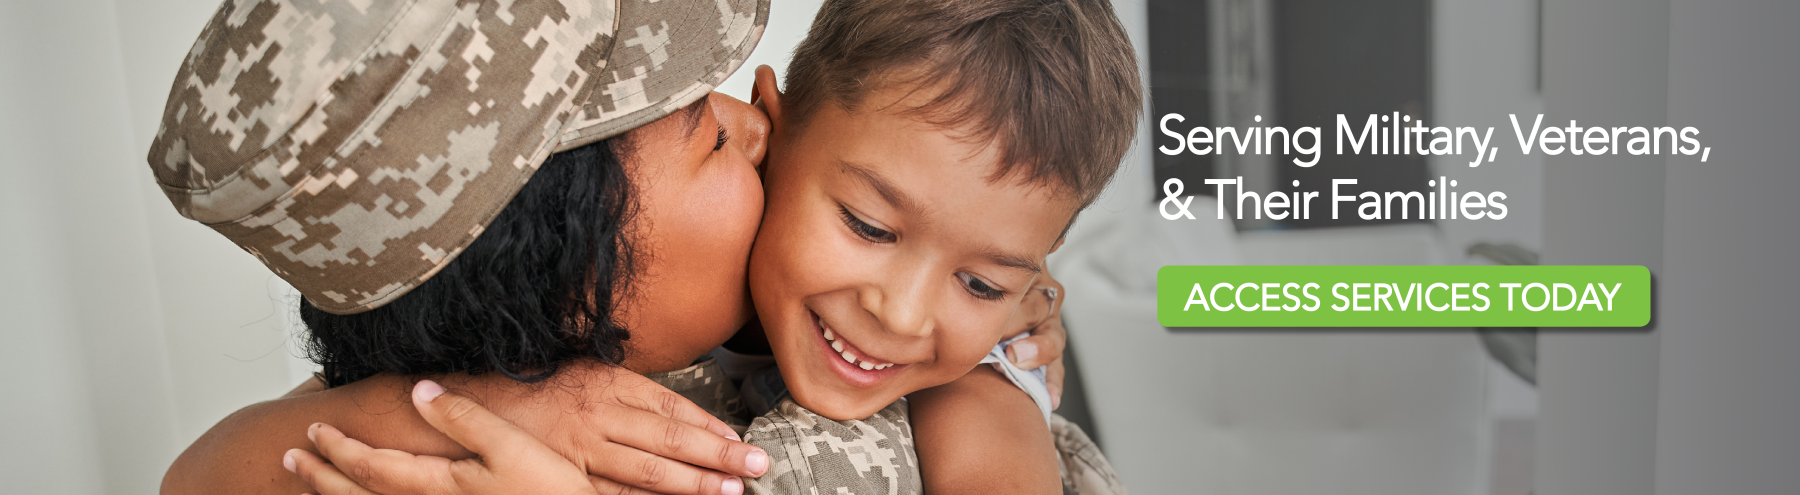 Serving Military, Veterans and their families - access services now